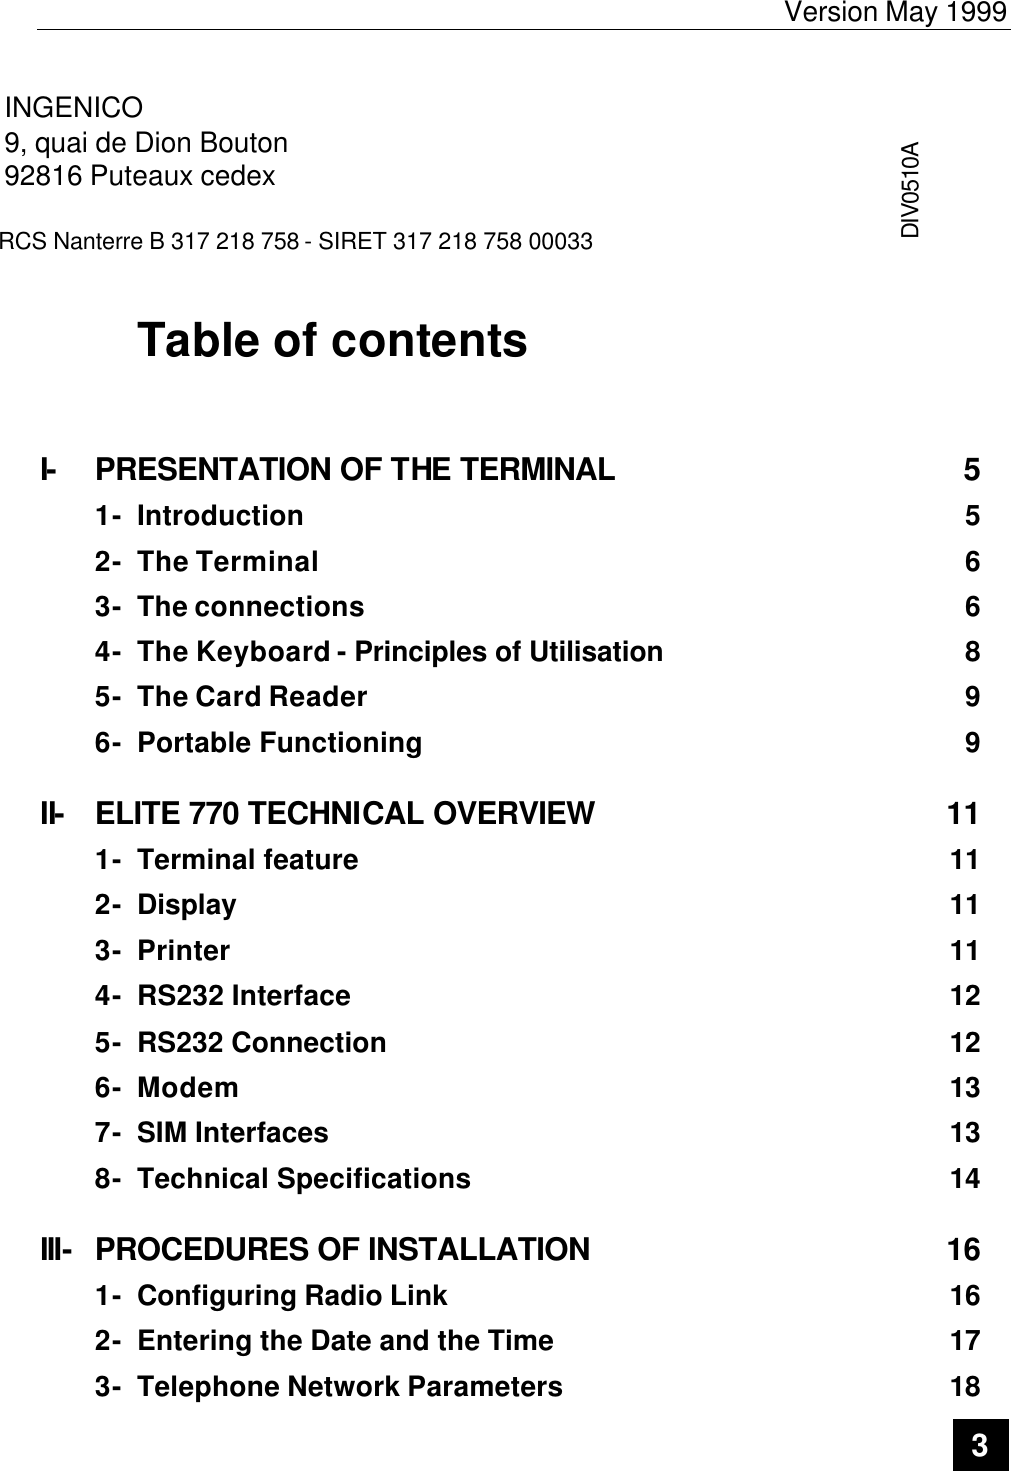 Version May 1999   3  INGENICO 9, quai de Dion Bouton 92816 Puteaux cedex  RCS Nanterre B 317 218 758 - SIRET 317 218 758 00033 DIV0510A  Table of contents   I- PRESENTATION OF THE TERMINAL 5 1- Introduction 5 2- The Terminal 6 3- The connections 6 4- The Keyboard - Principles of Utilisation 8 5- The Card Reader 9 6- Portable Functioning 9 II- ELITE 770 TECHNICAL OVERVIEW 11 1- Terminal feature 11 2- Display 11 3- Printer 11 4- RS232 Interface 12 5- RS232 Connection 12 6- Modem 13 7- SIM Interfaces 13 8- Technical Specifications 14 III- PROCEDURES OF INSTALLATION 16 1- Configuring Radio Link 16 2- Entering the Date and the Time 17 3- Telephone Network Parameters 18 